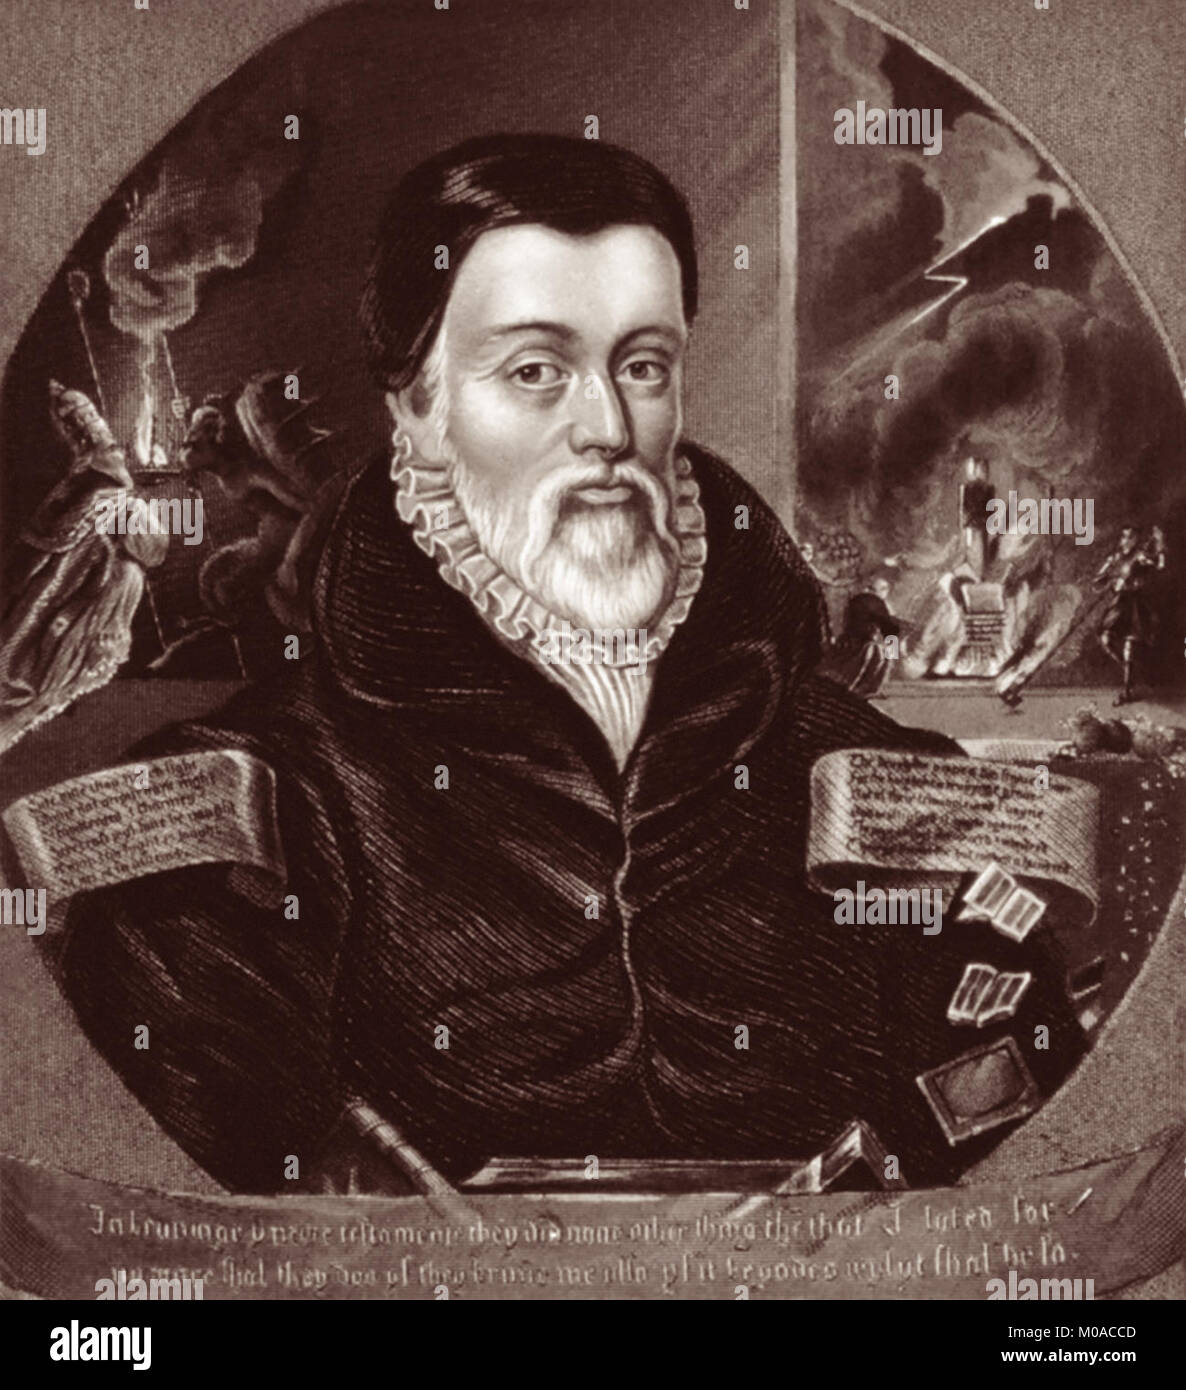 William Tyndale (1494 - 1536) was an English scholar and leading figure in the Protestant Reformation who, defying the Catholic Church and English government, translated the Bible into English, for which he was strangled and burnt at the stake in 1536. Stock Photo